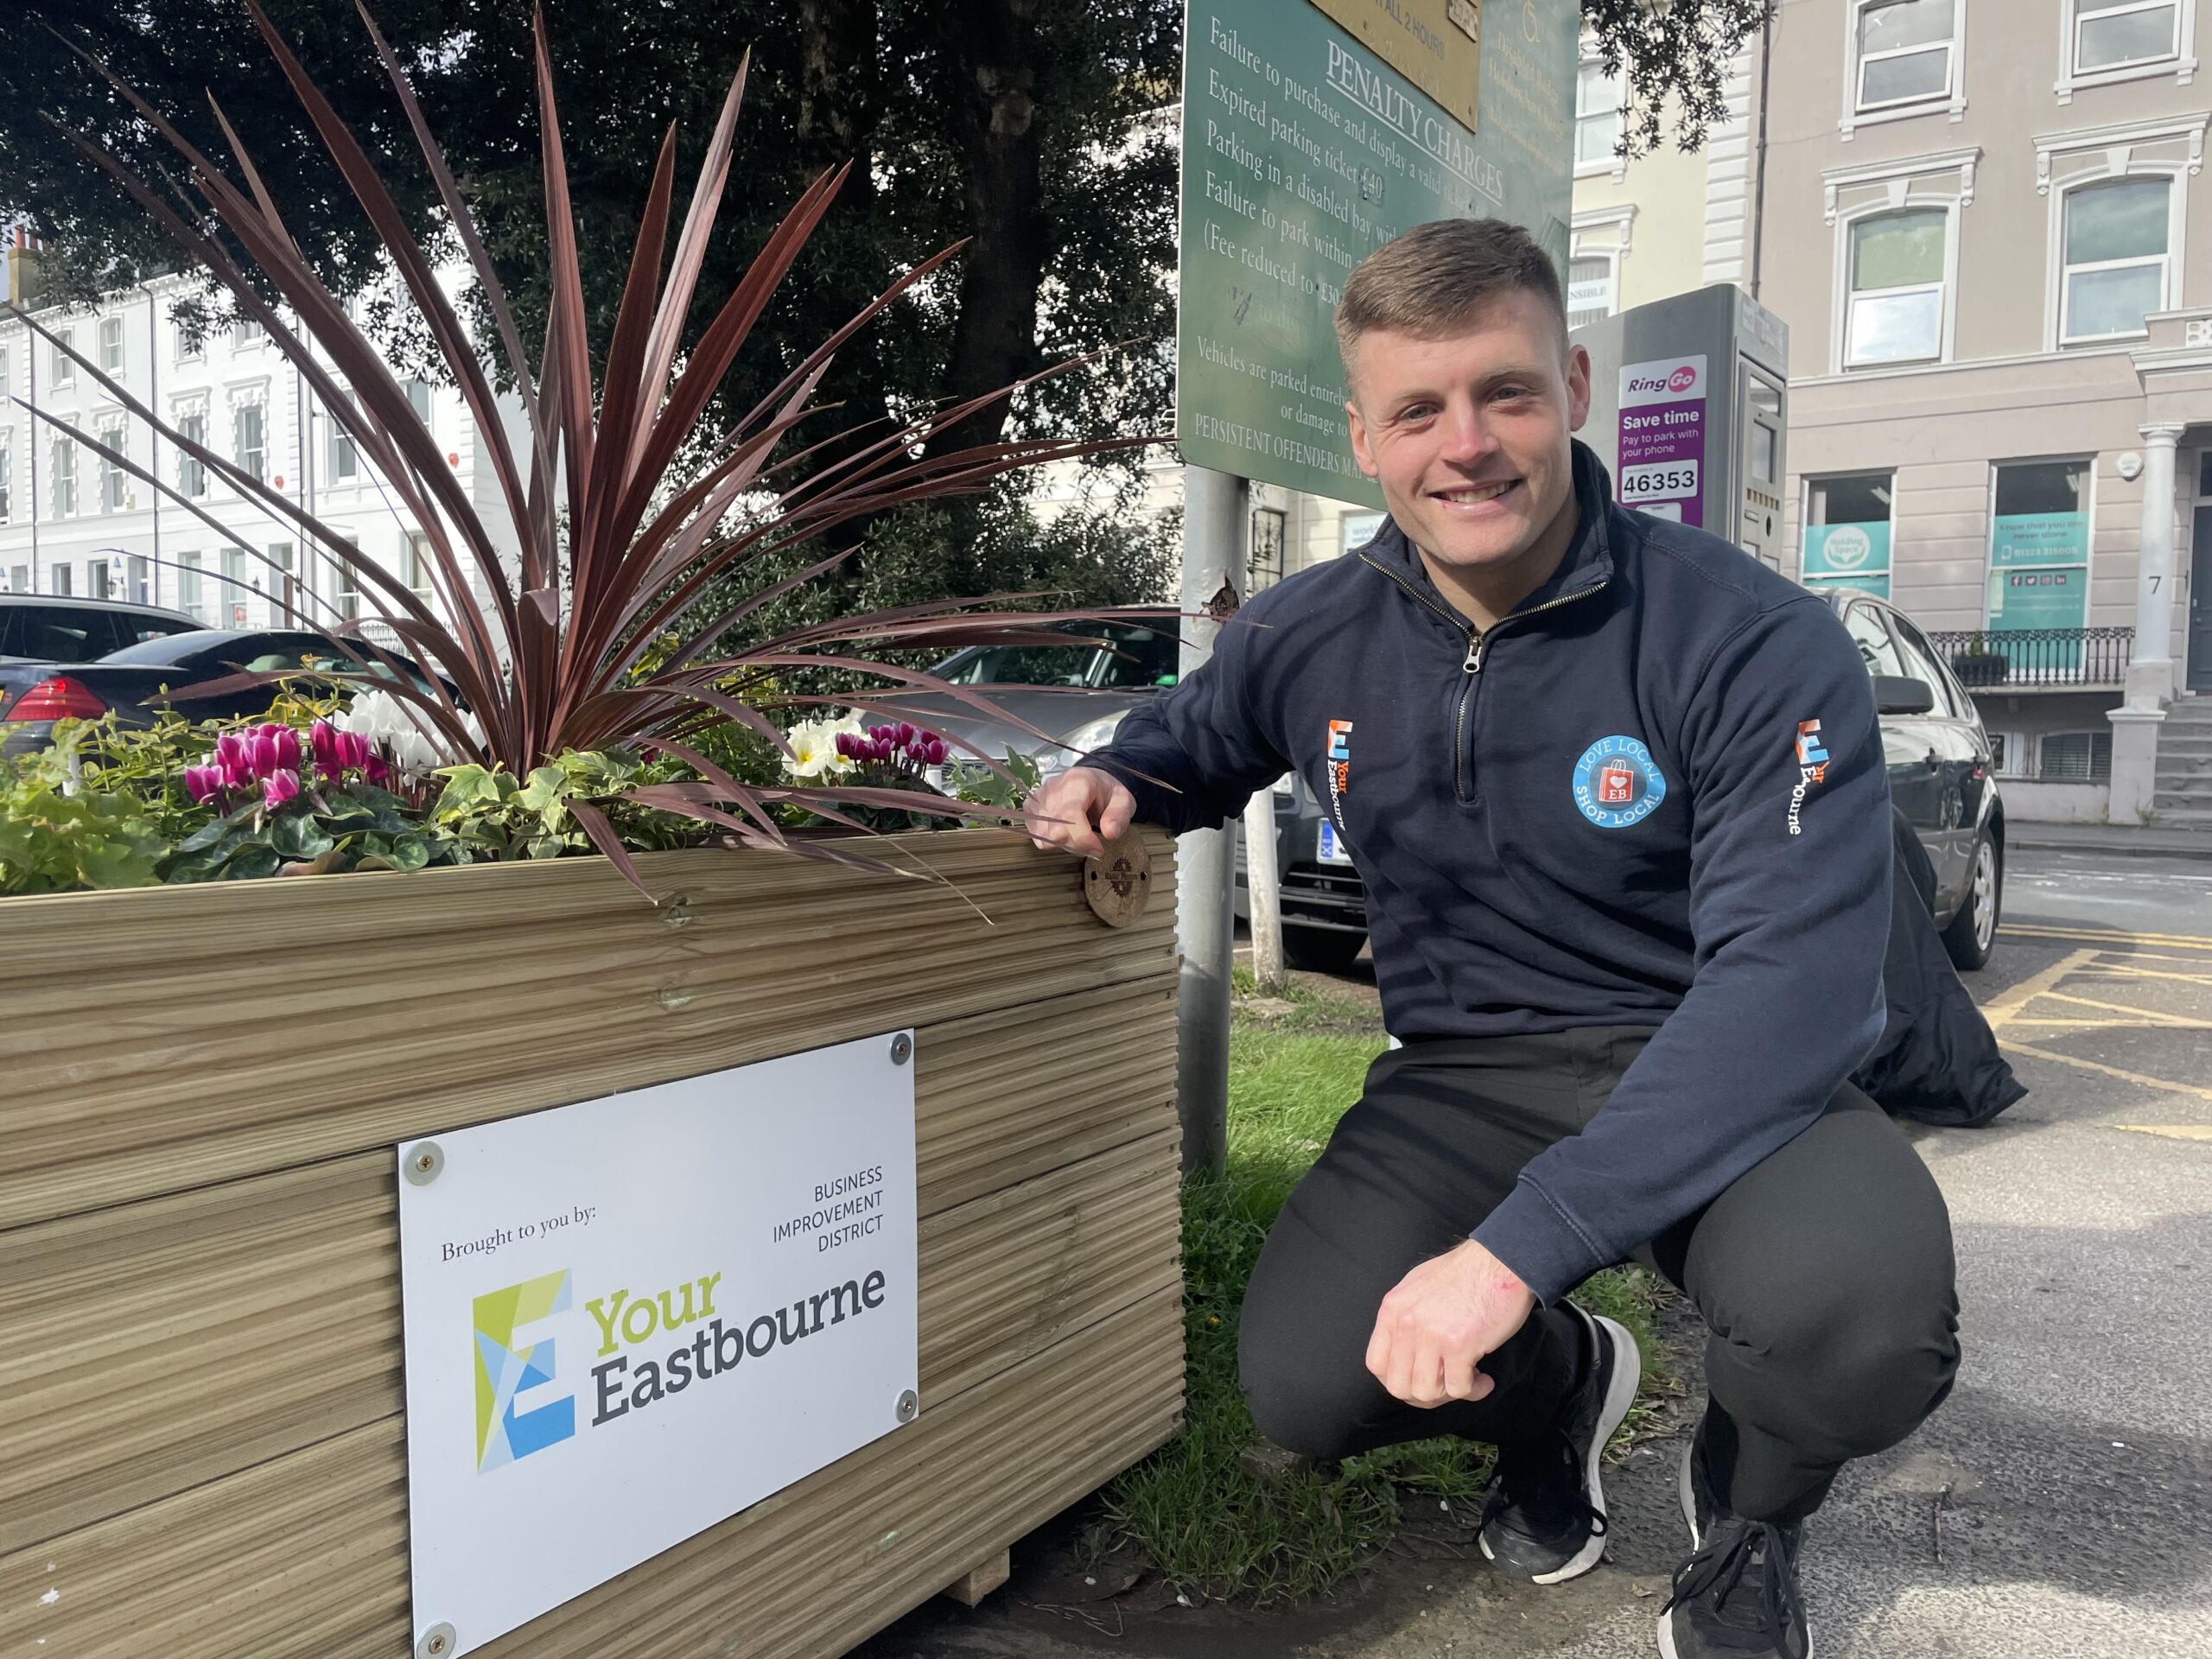 Request for Tender: Planters in Eastbourne for Summer Season